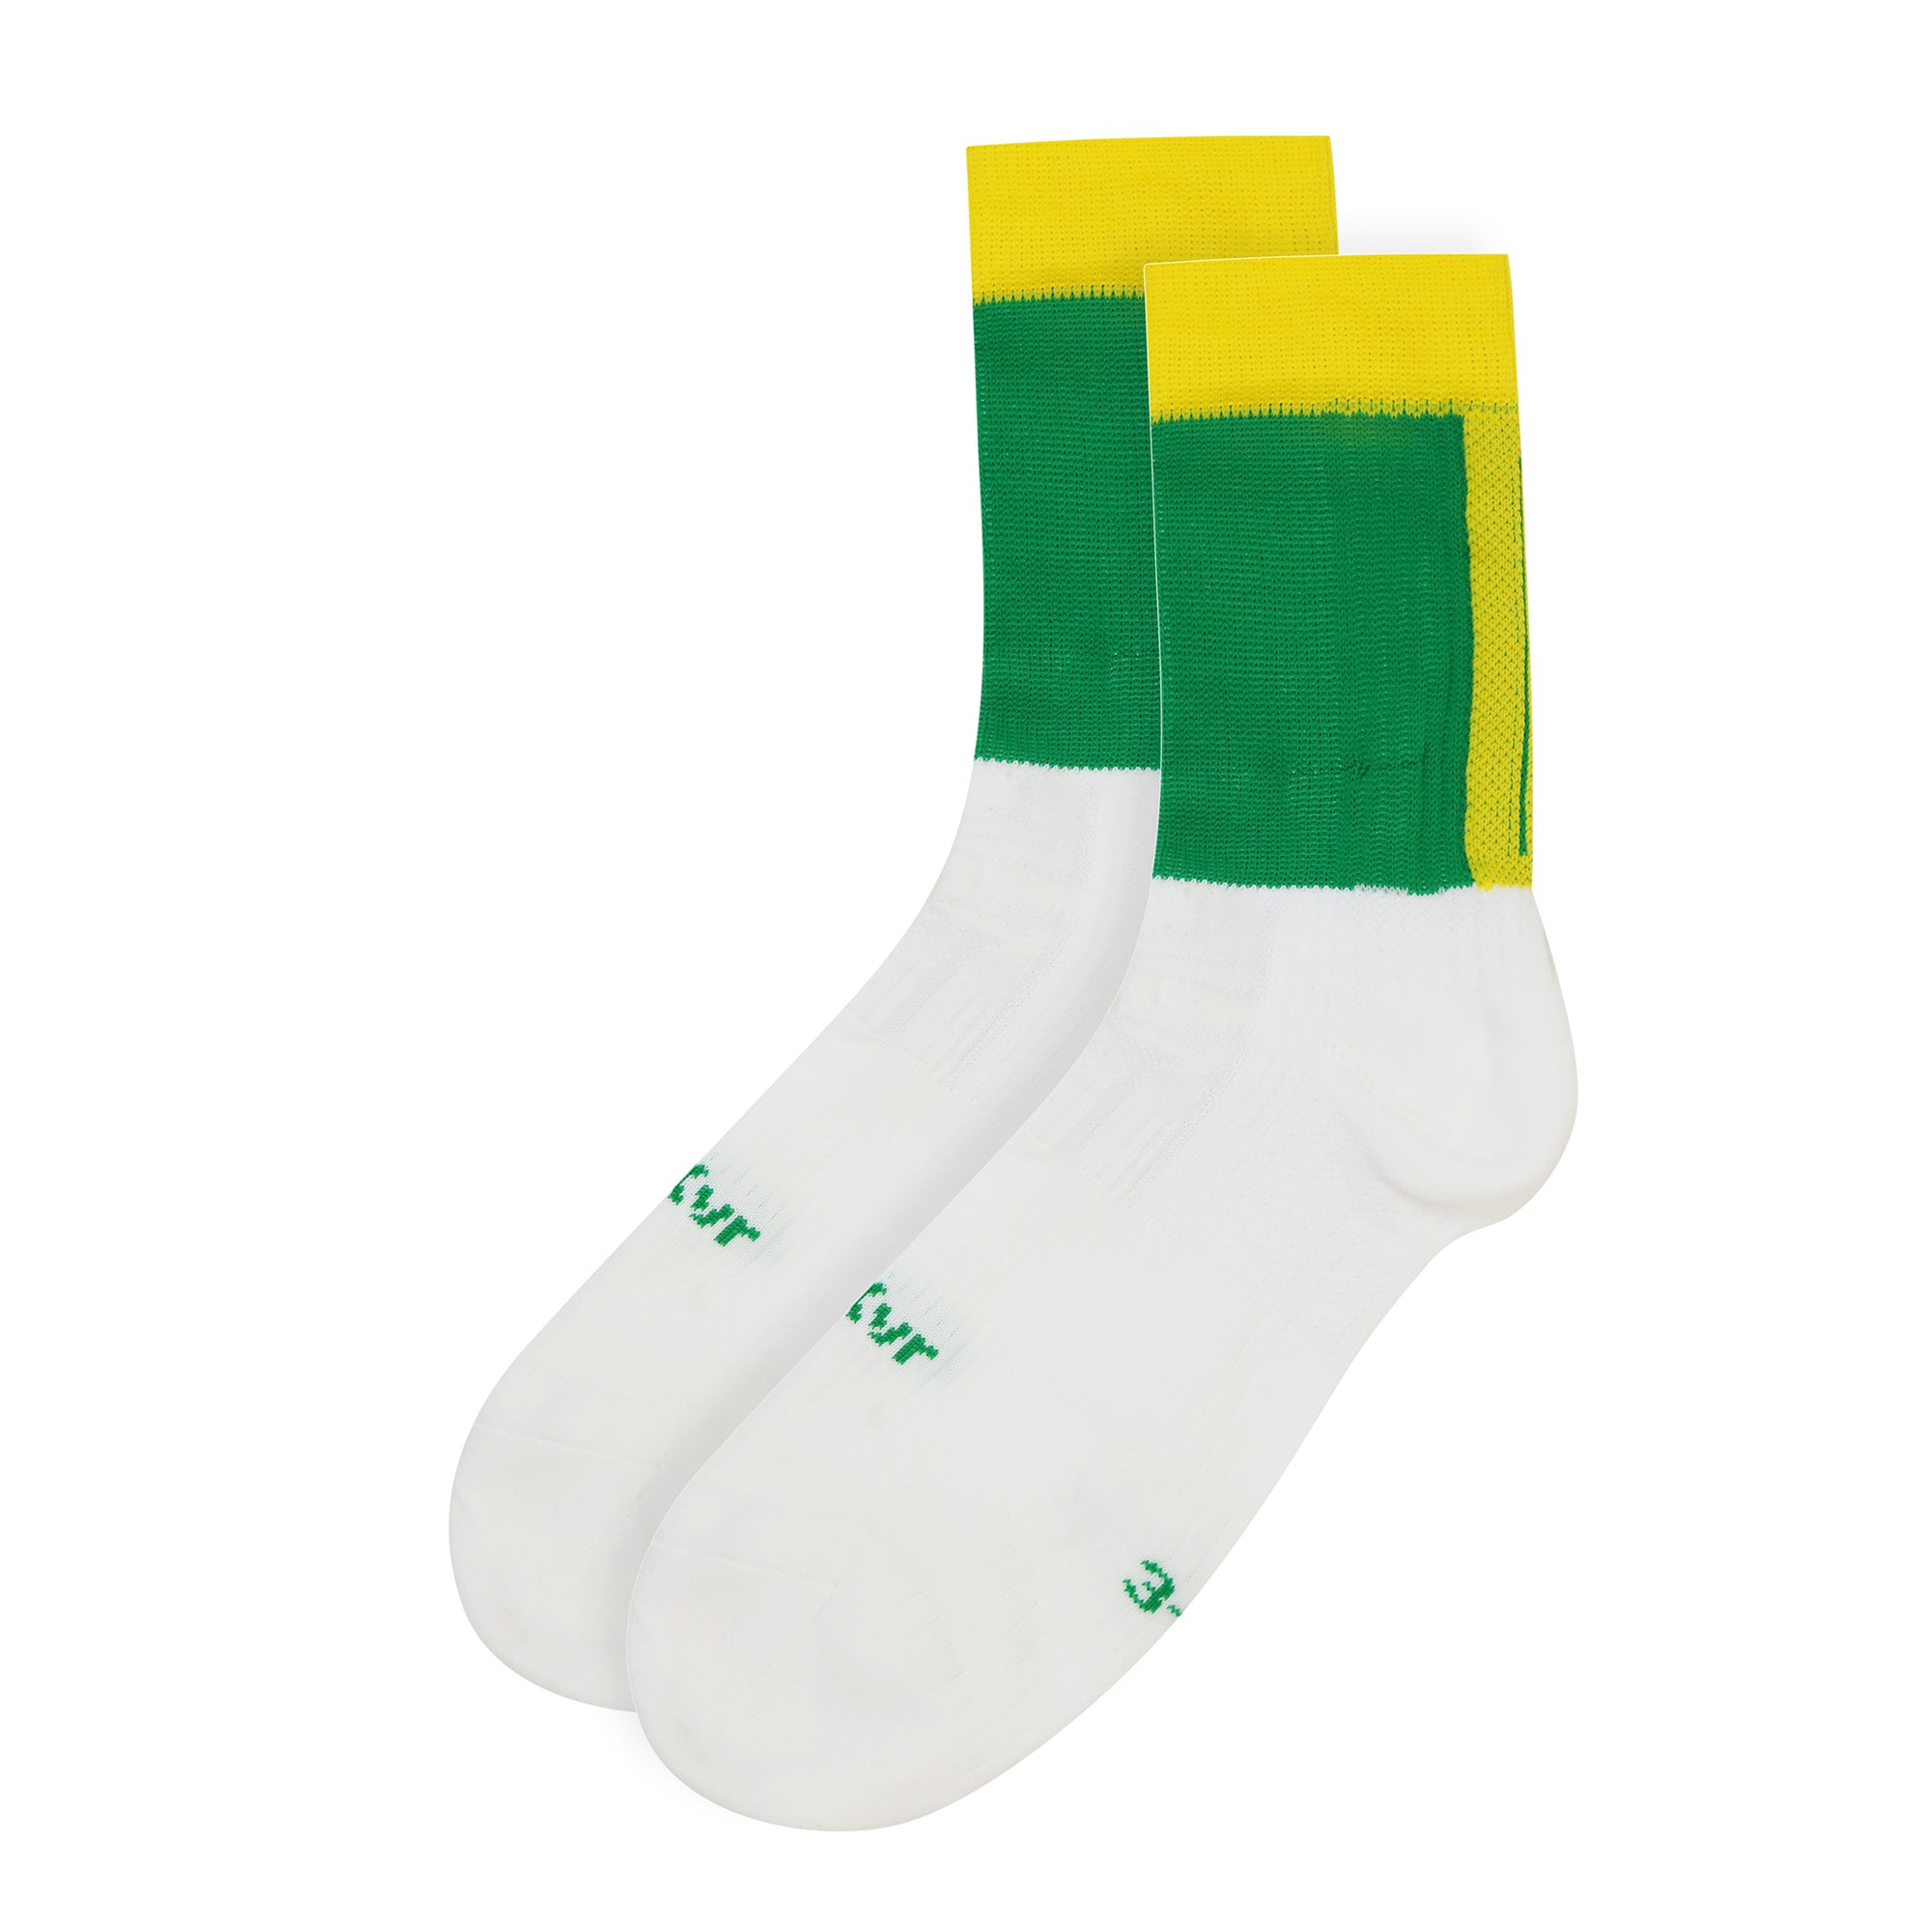 Mc Keever Leitrim GAA Official Playing Socks - Kids - Green/Gold/White